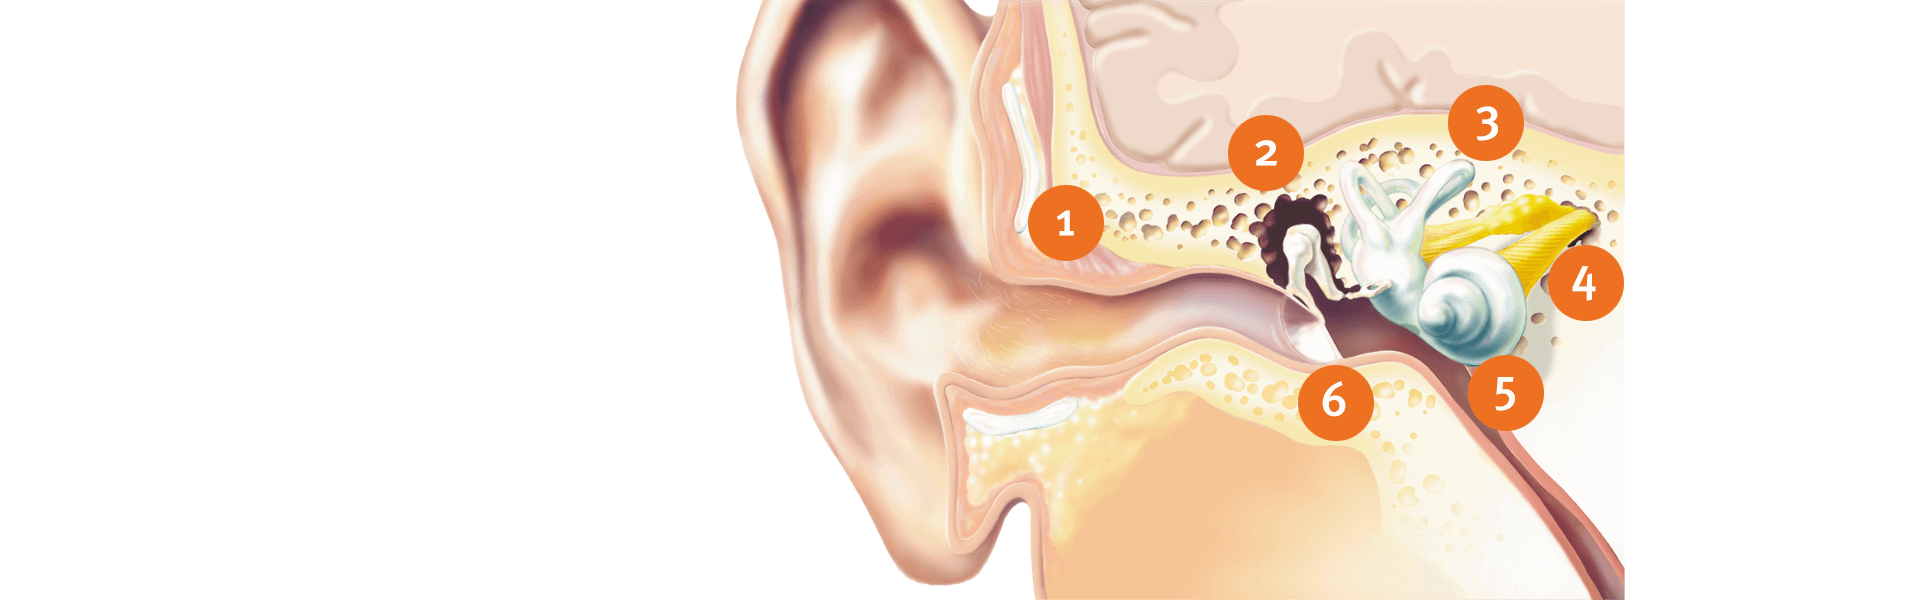 A picture of the outer ear, middle ear, inner ear, auditory nerve, cochlea and eardrum